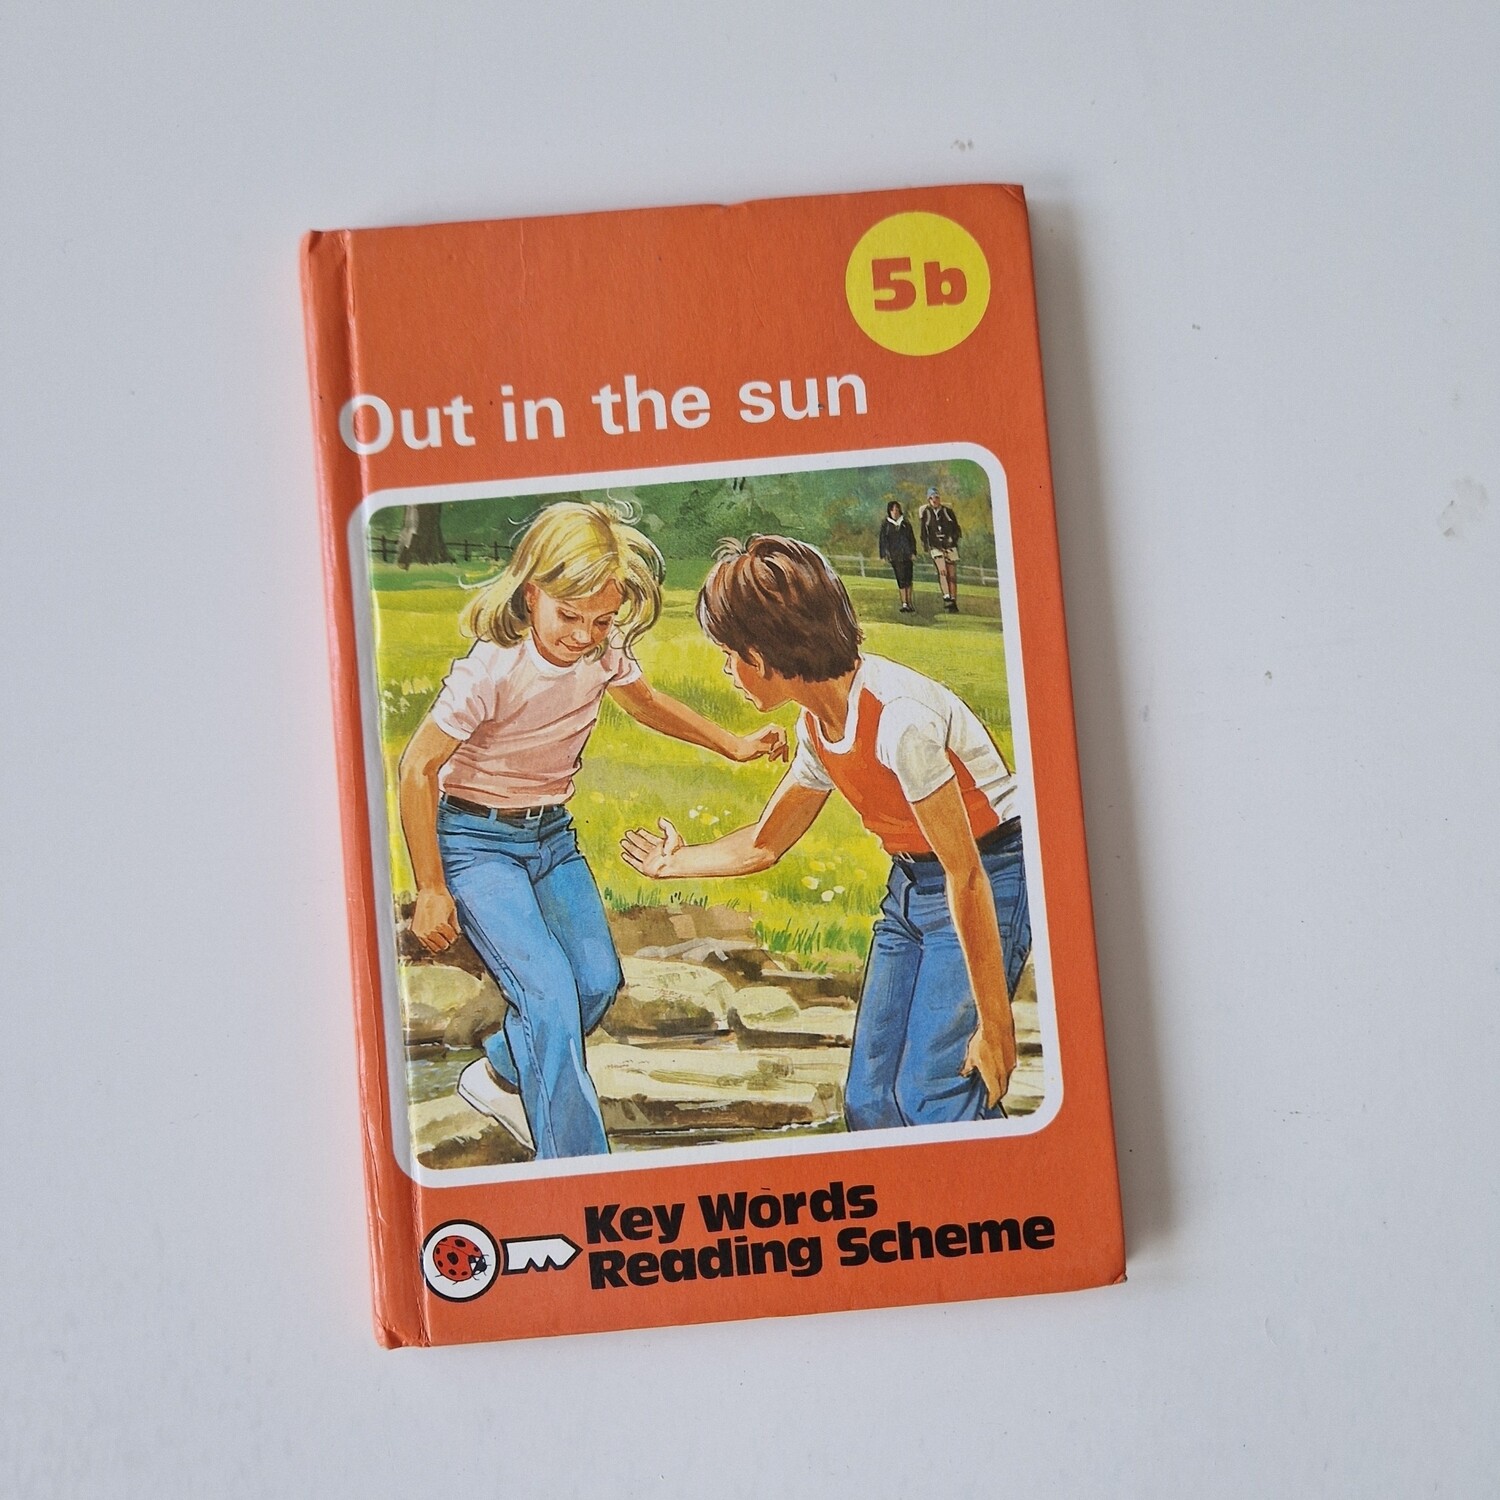 Out in the Sun - Peter & Jane Notebook - Ladybird book